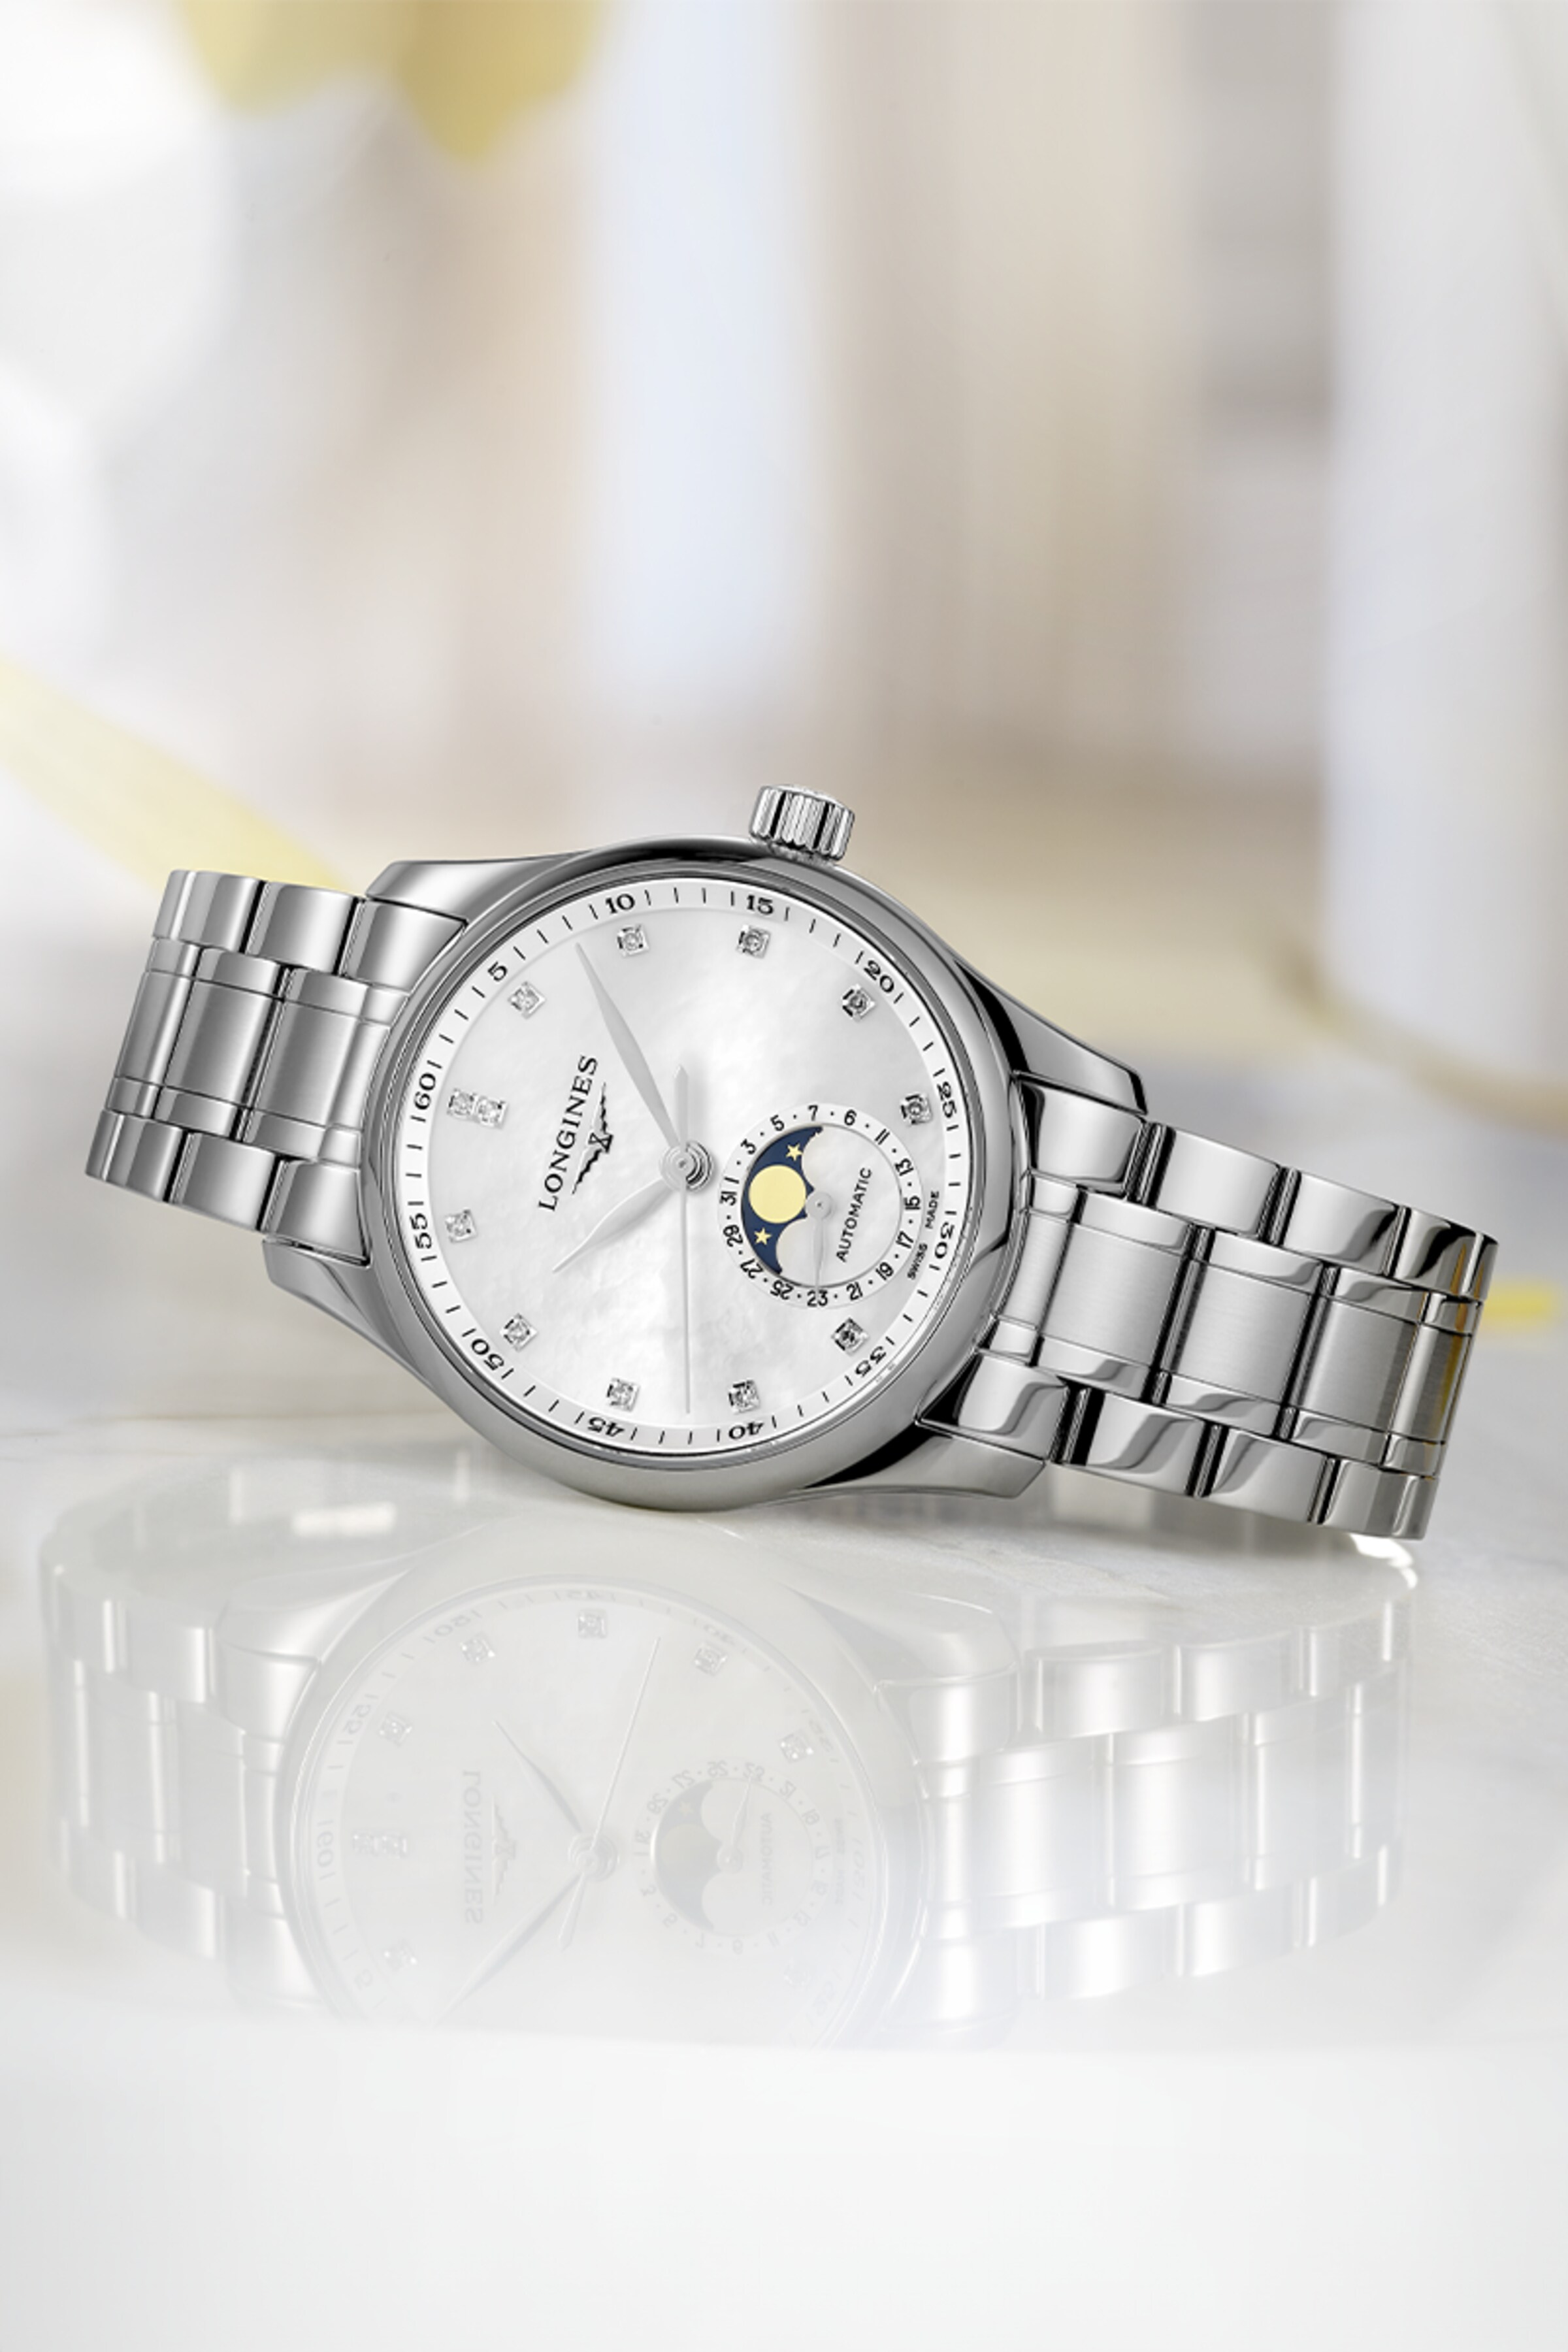 Longines Master collection white dial and steel bracelet L2.409.4.87.6 800X1200_